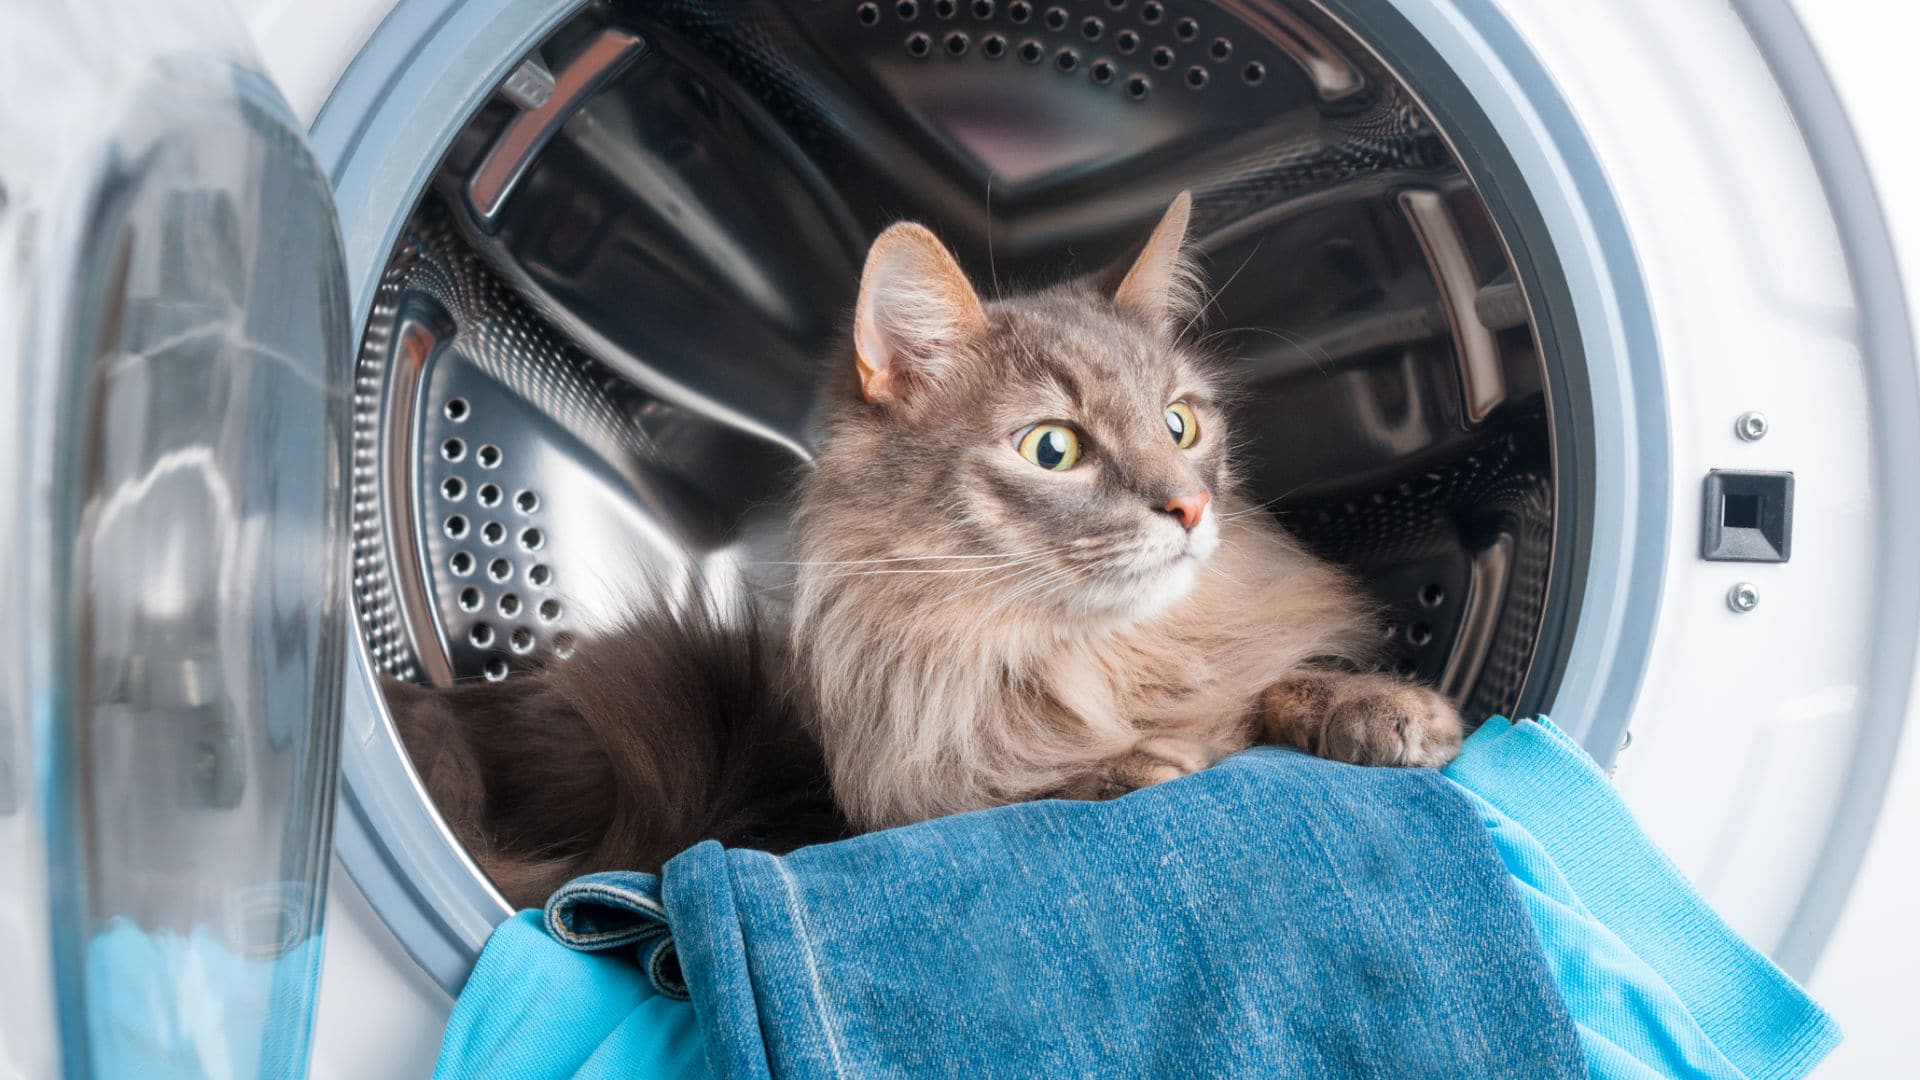 washer with a cat